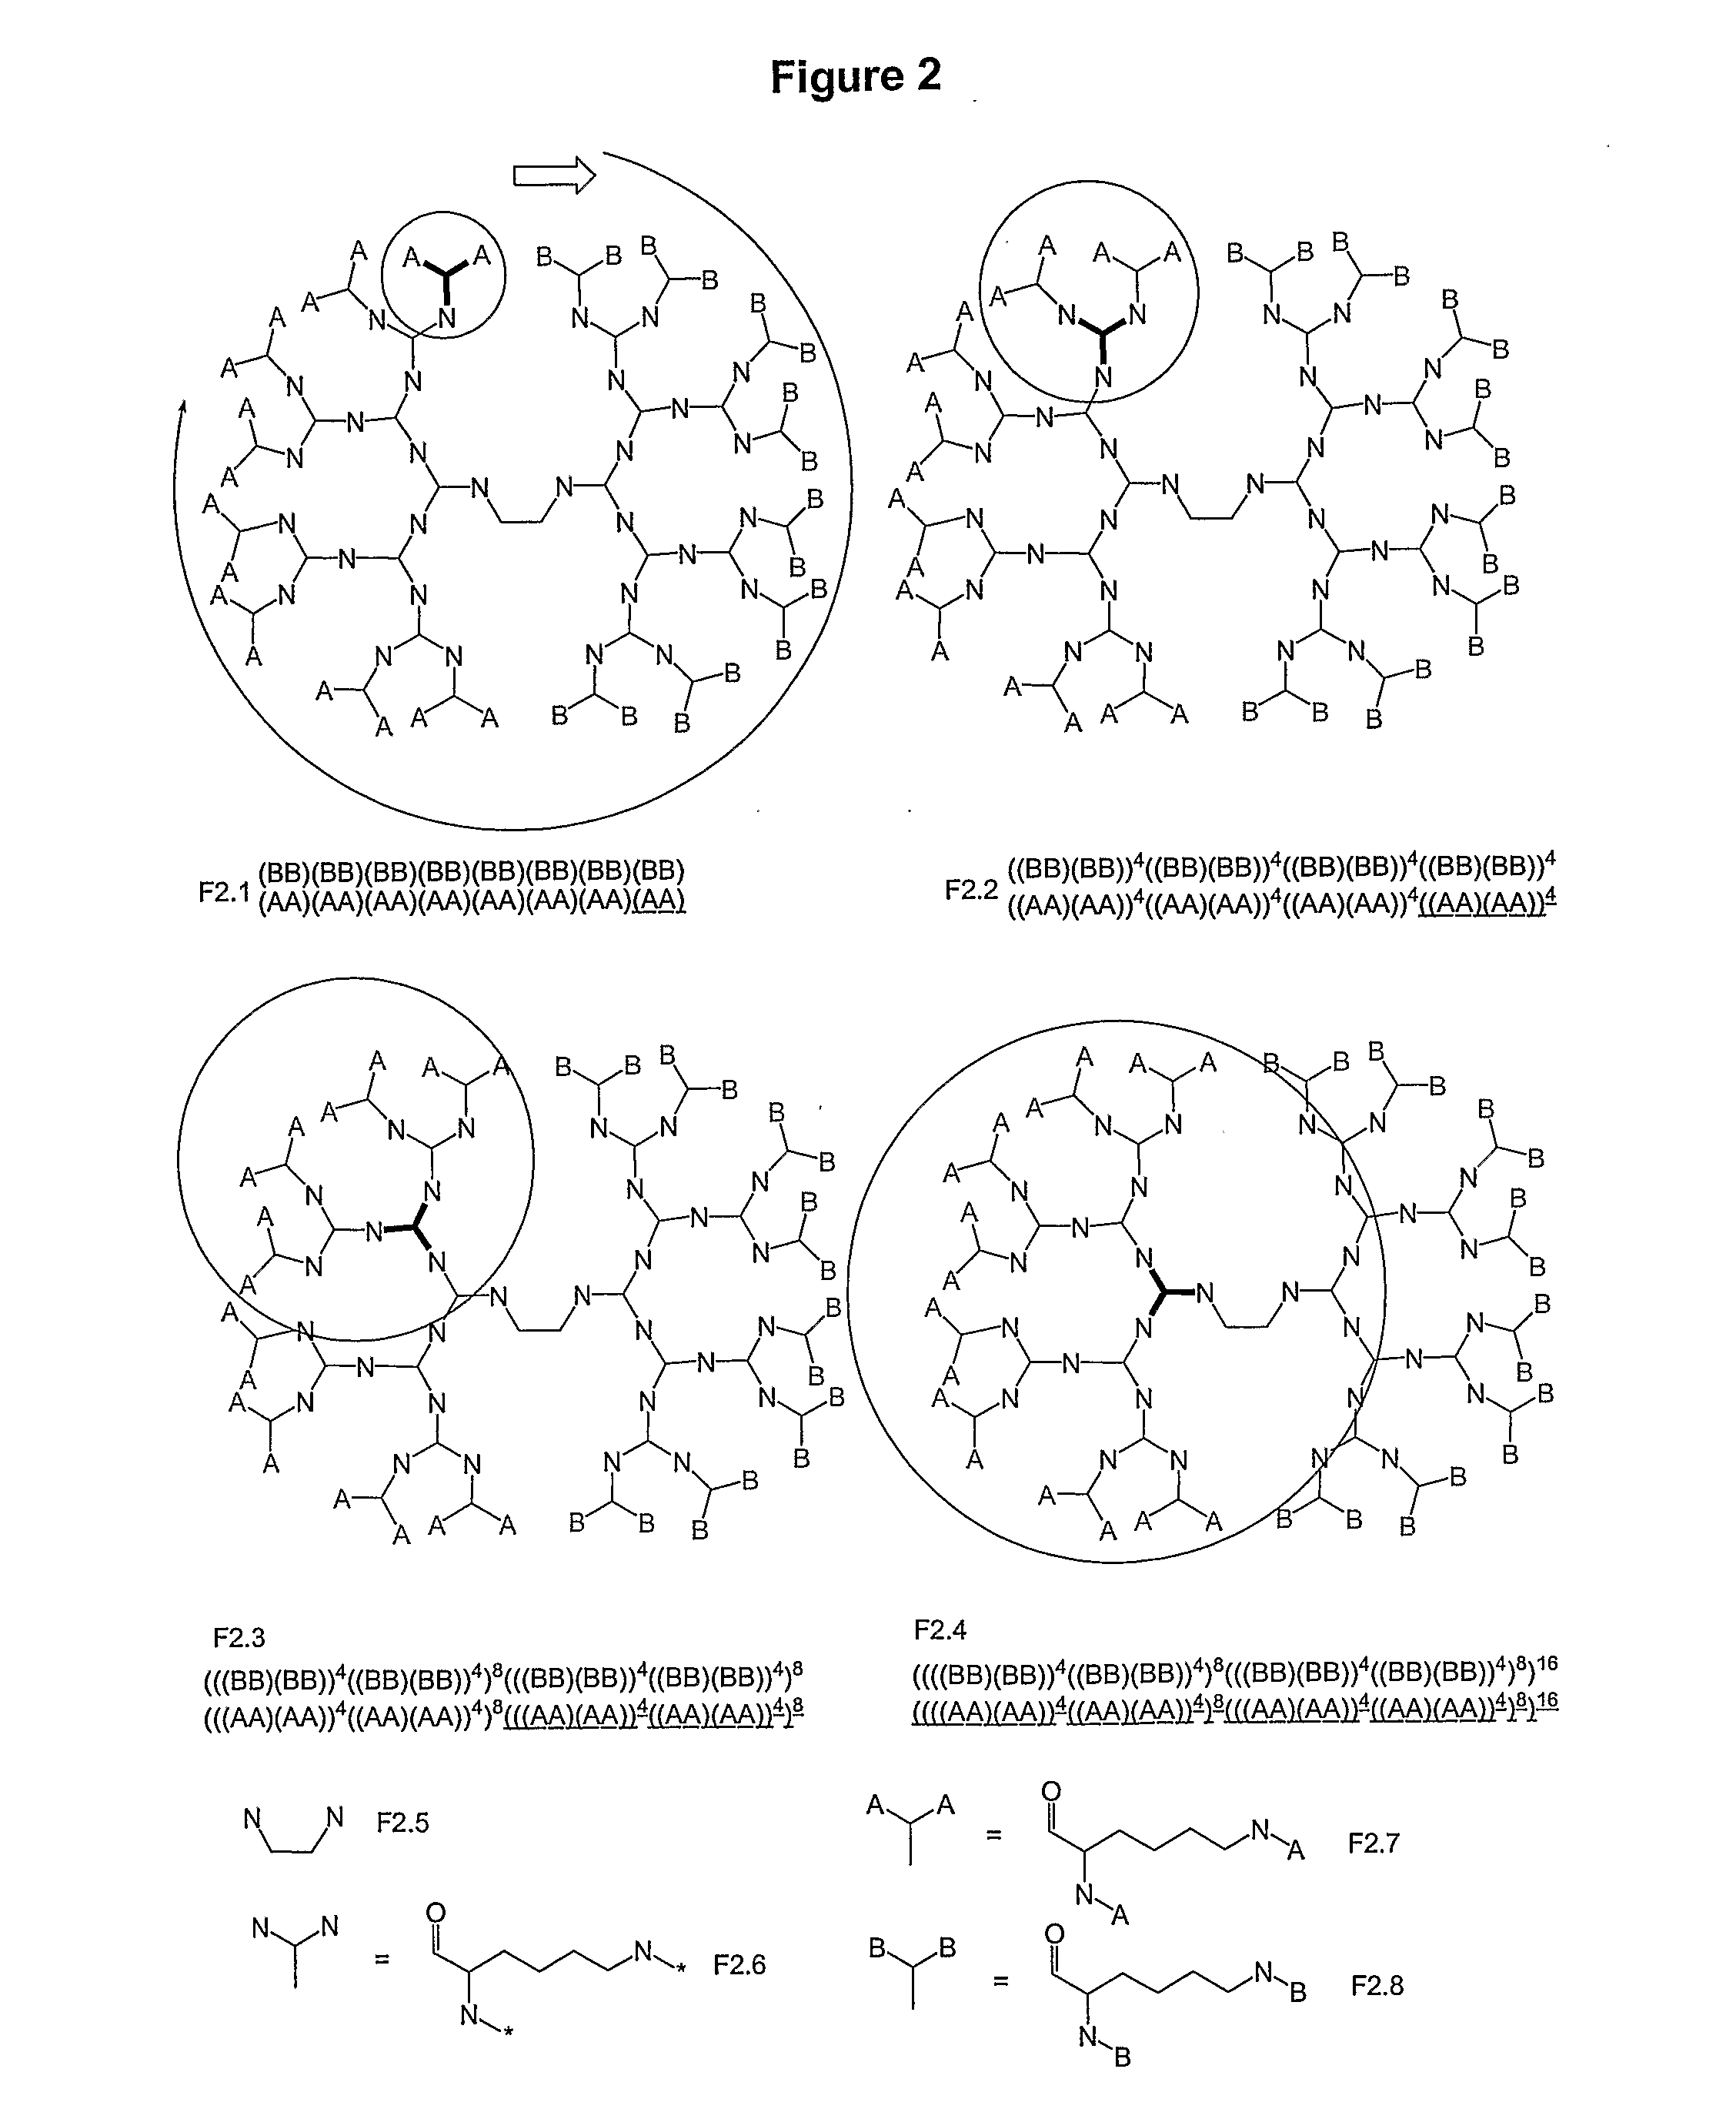 Macromolecular Compounds Having Controlled Stoichiometry